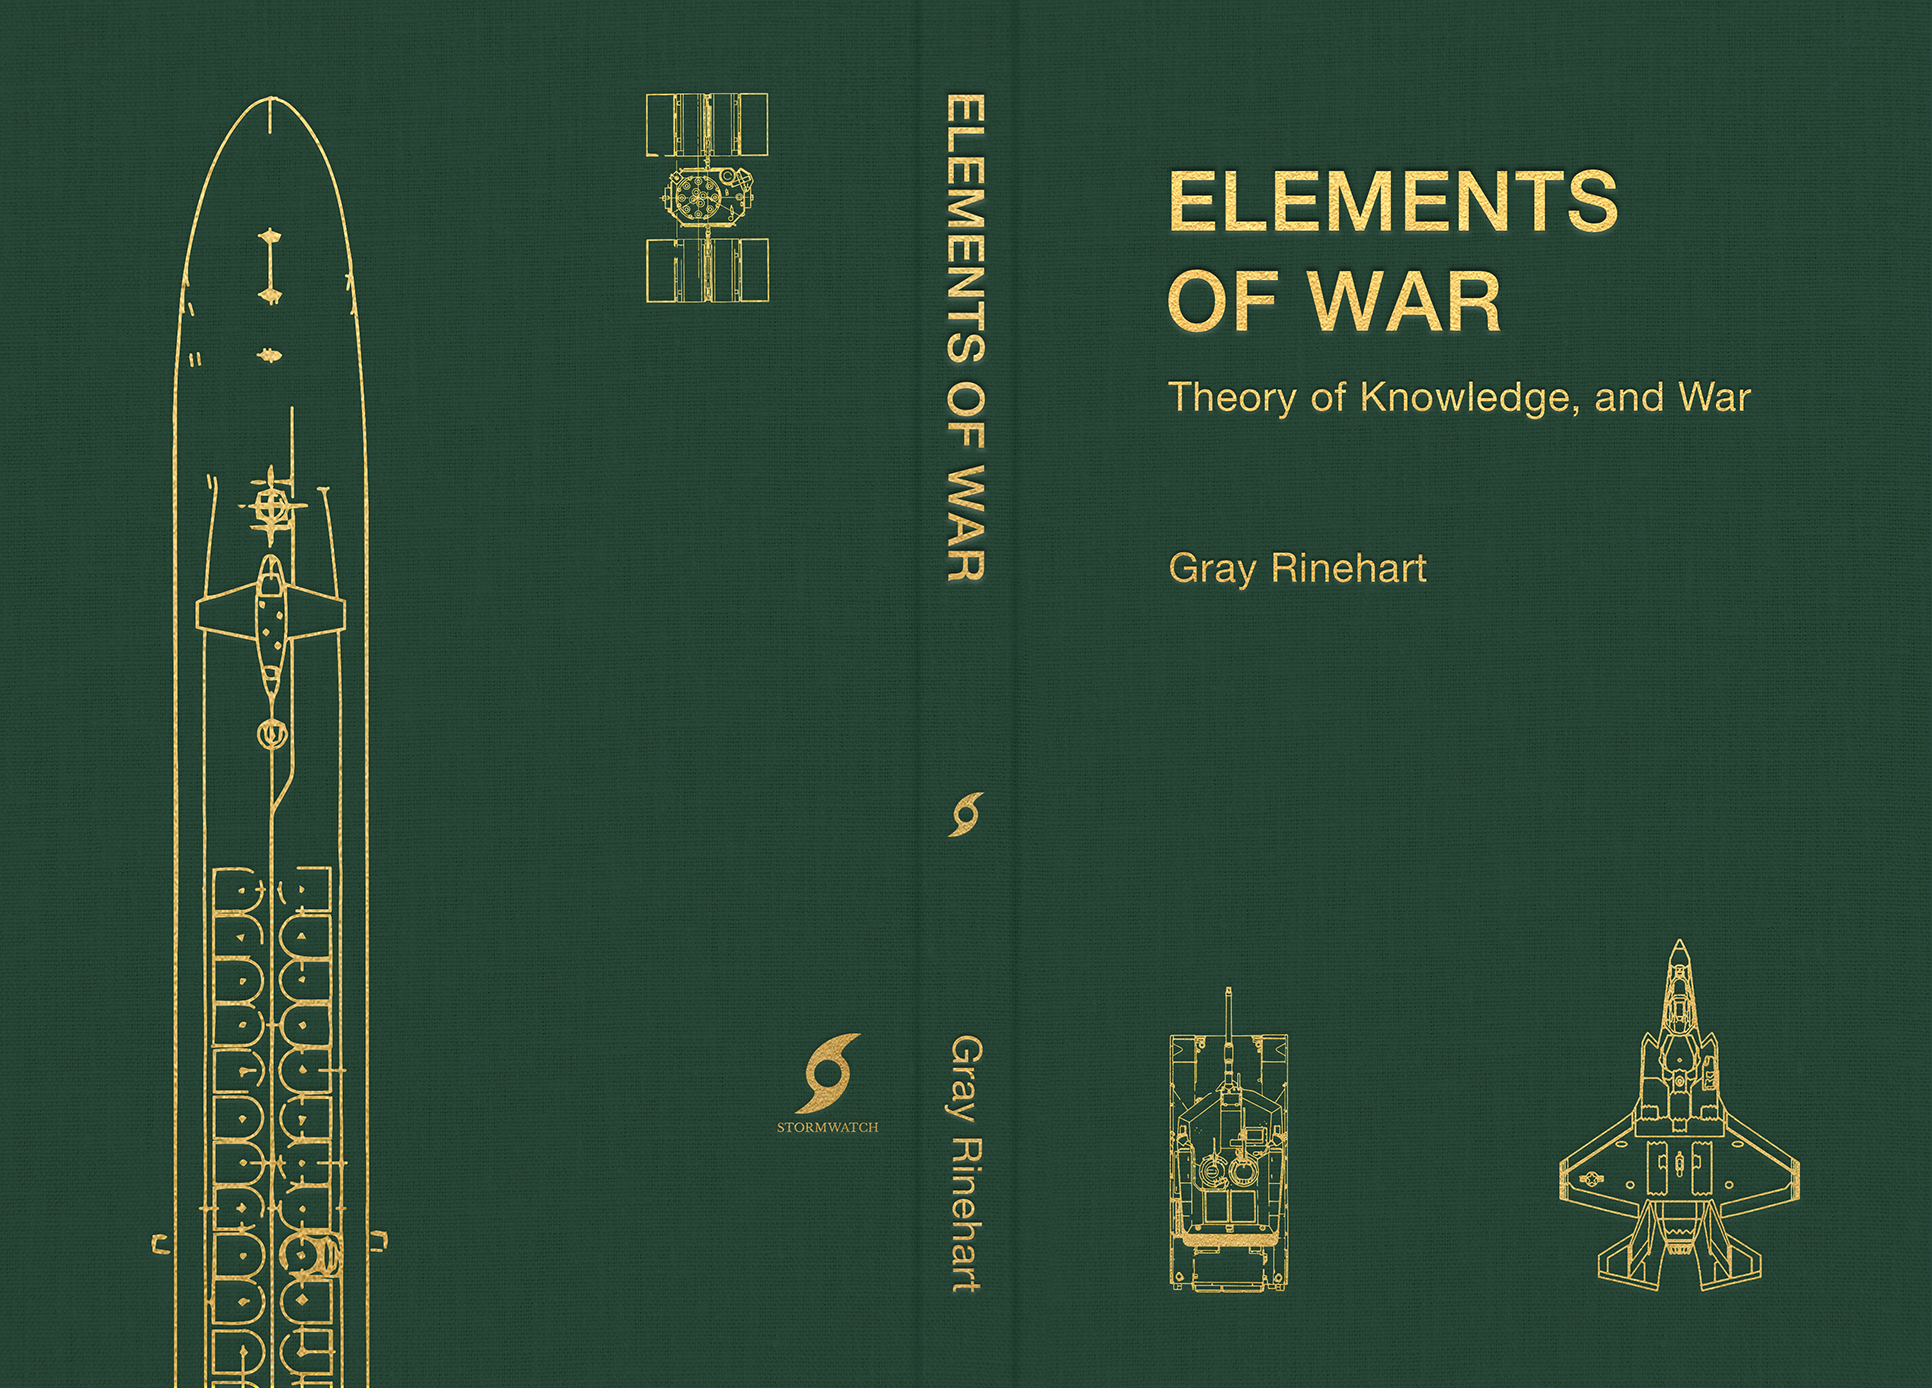 ELEMENTS OF WAR, cover by Christopher Rinehart